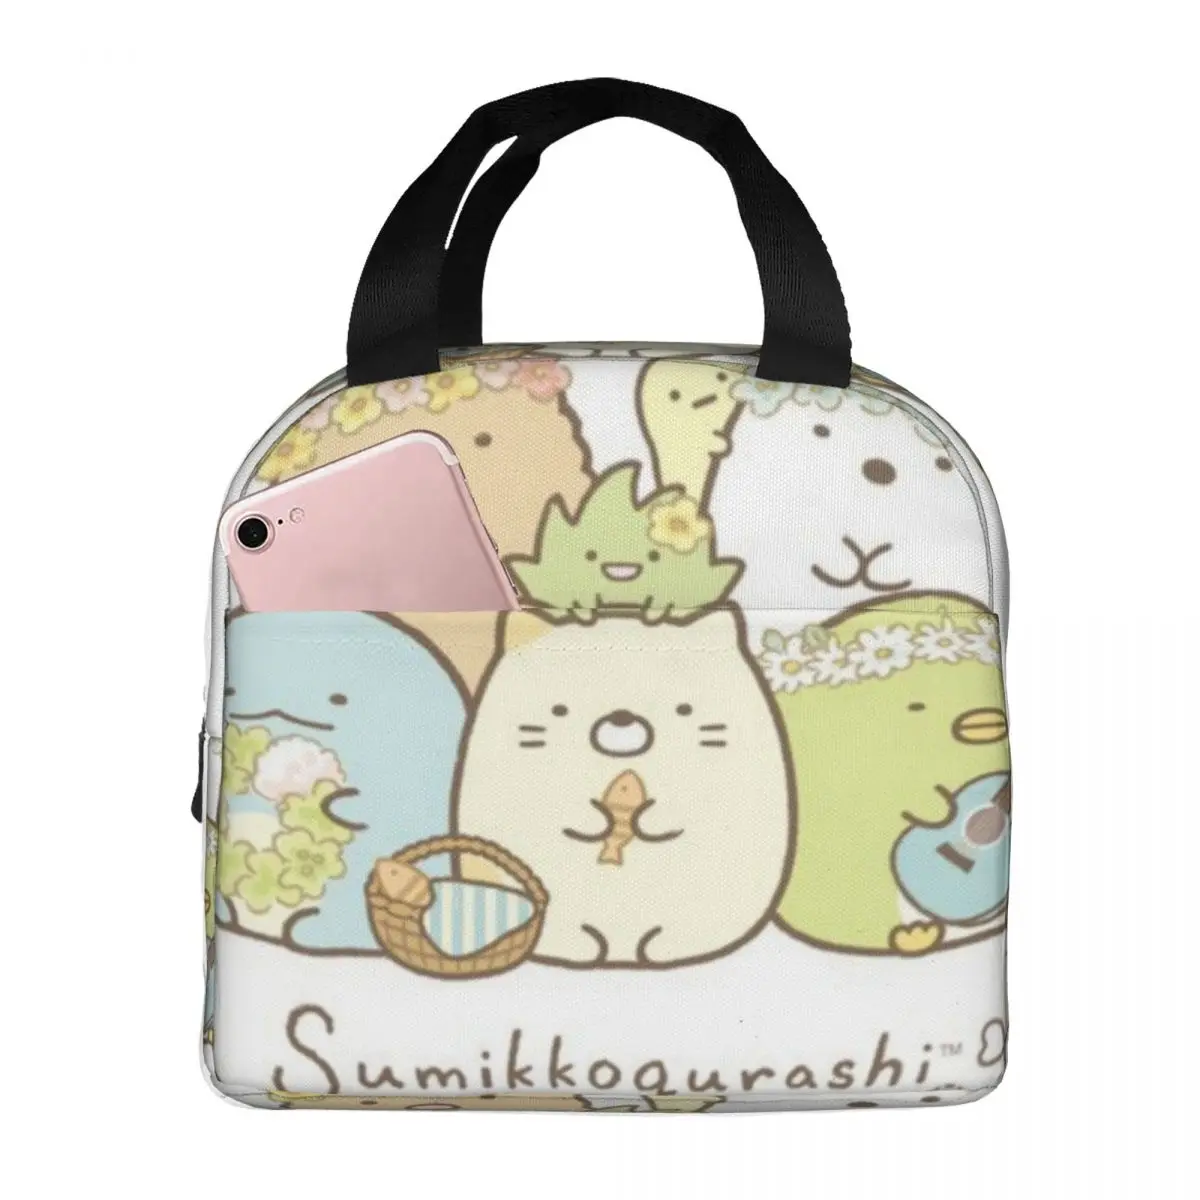 

Sumikko Gurashi Thermal Insulated Lunch Bag Insulated bento bag Lunch Container Food Bag Large Tote Lunch Box Office Pupil